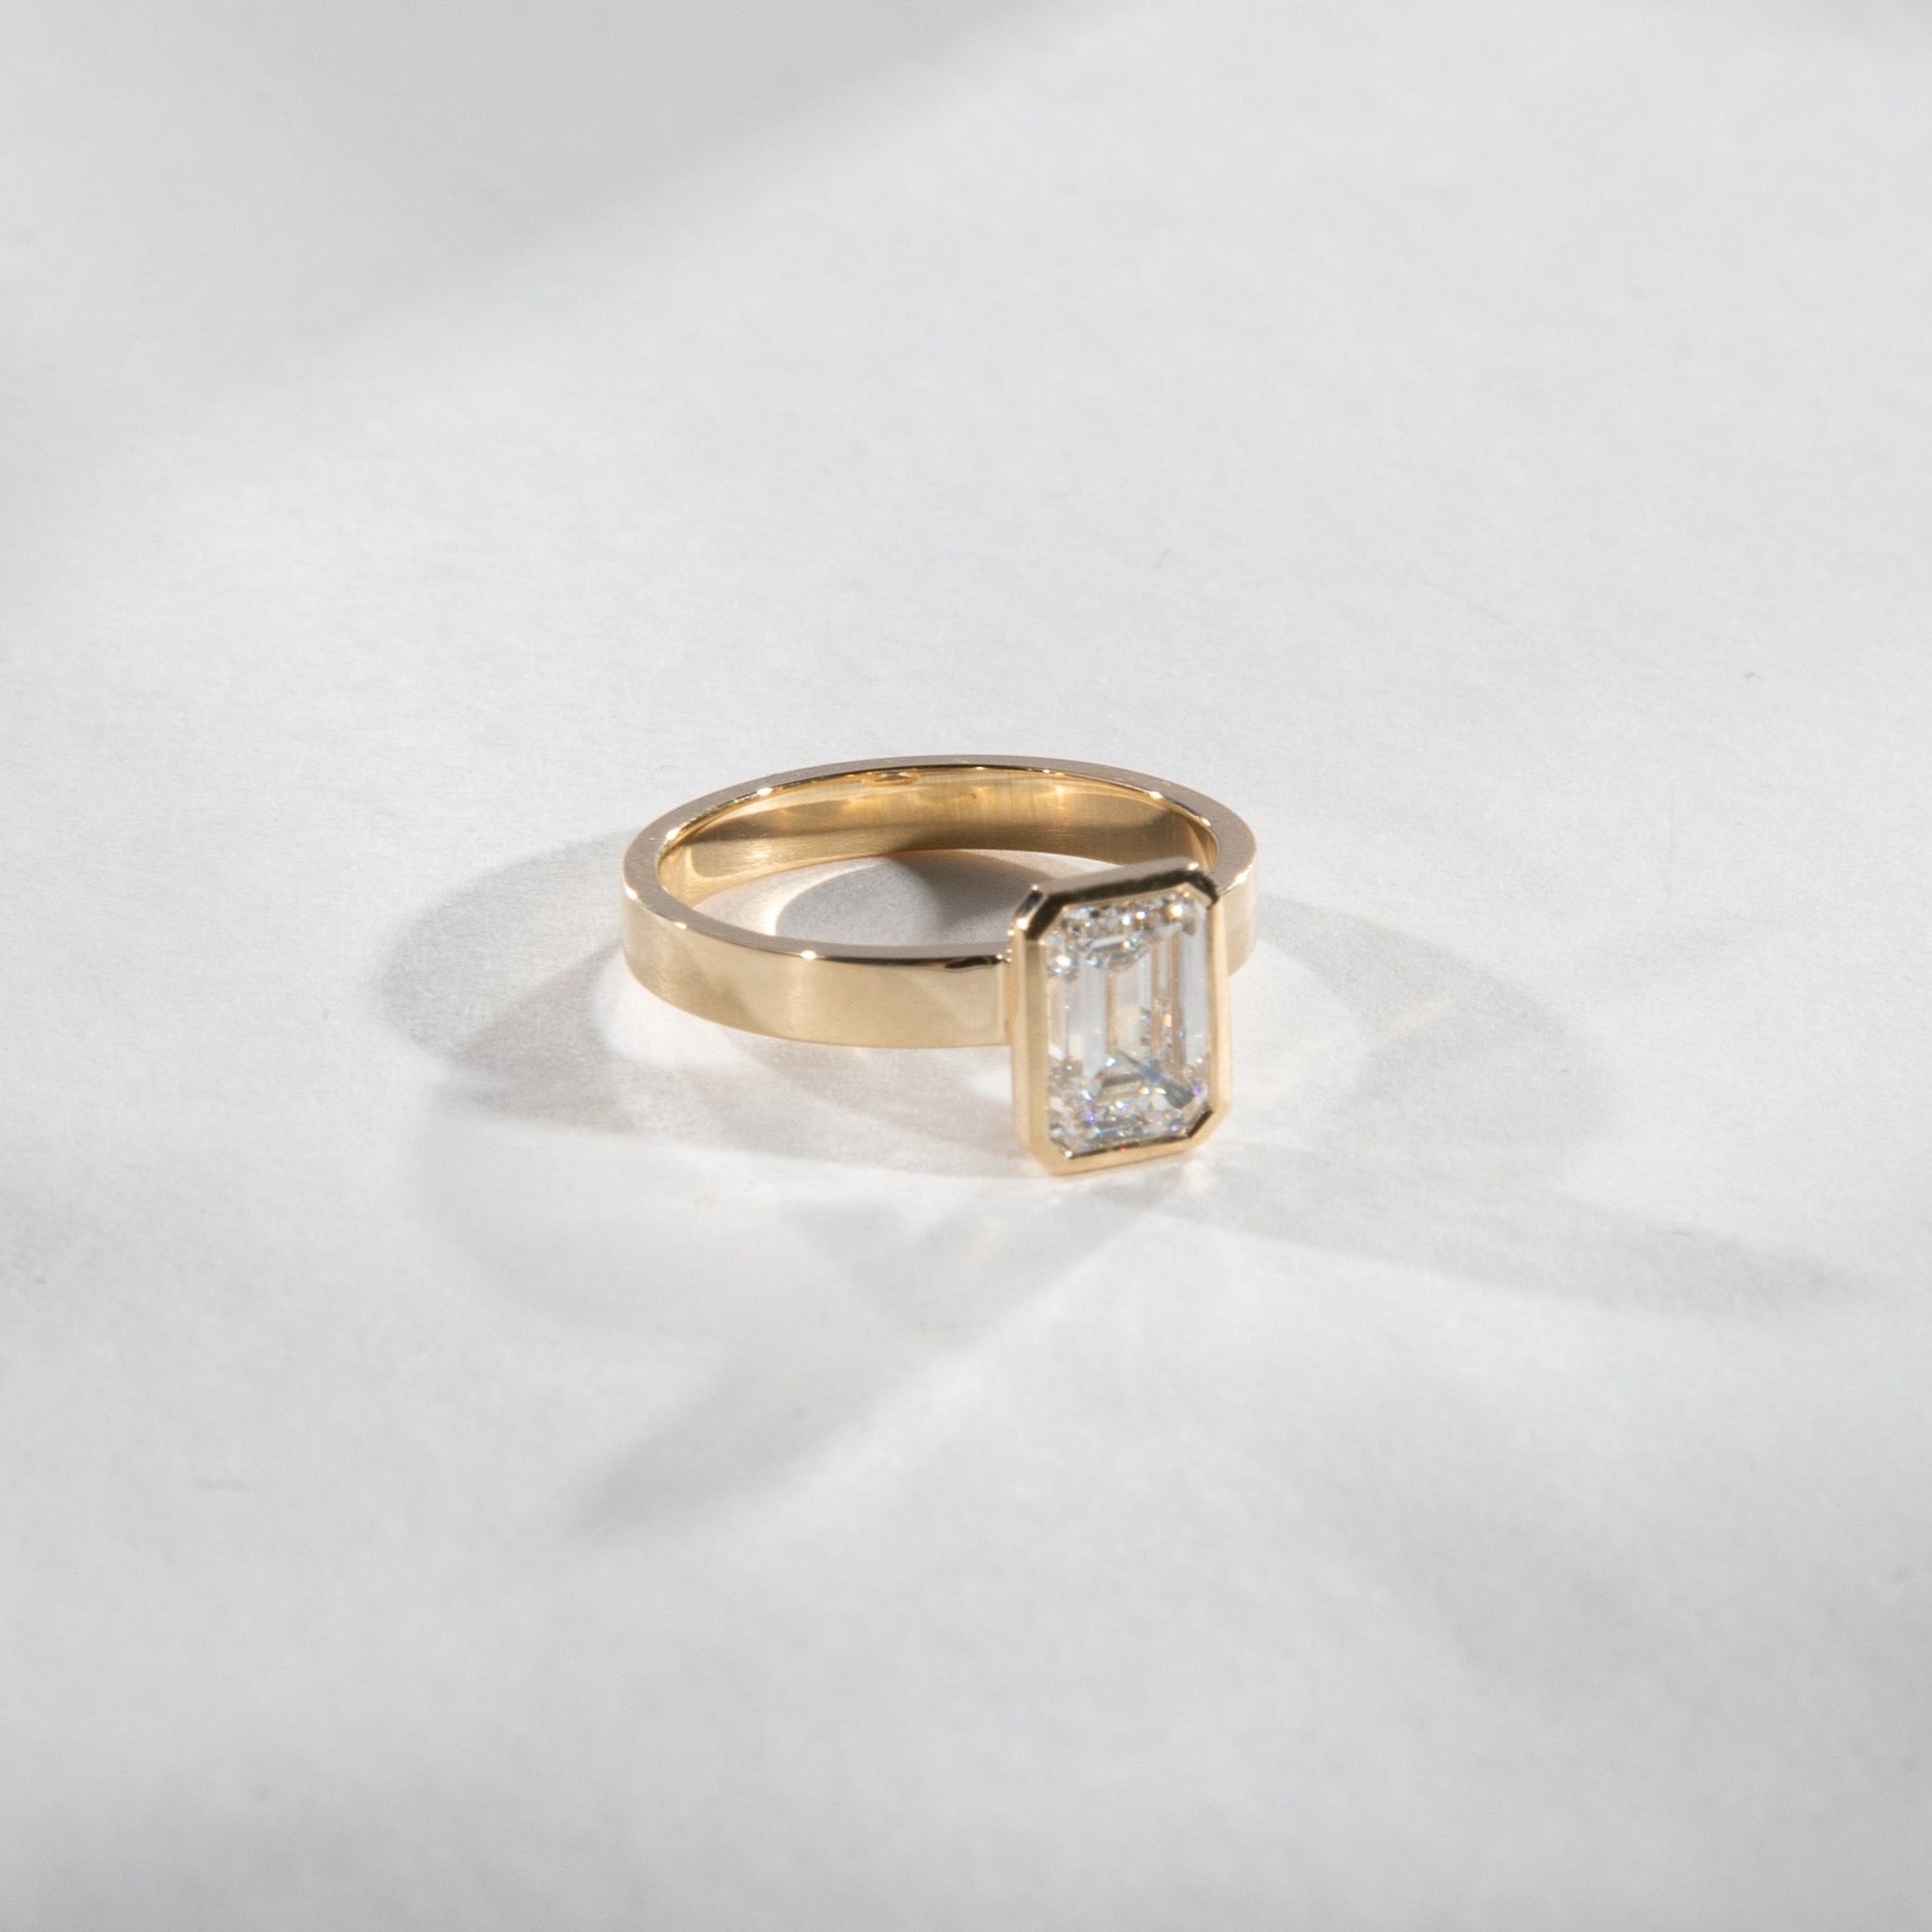 Badi Unique ring in 14k Yellow Gold set with a lab-grown diamond